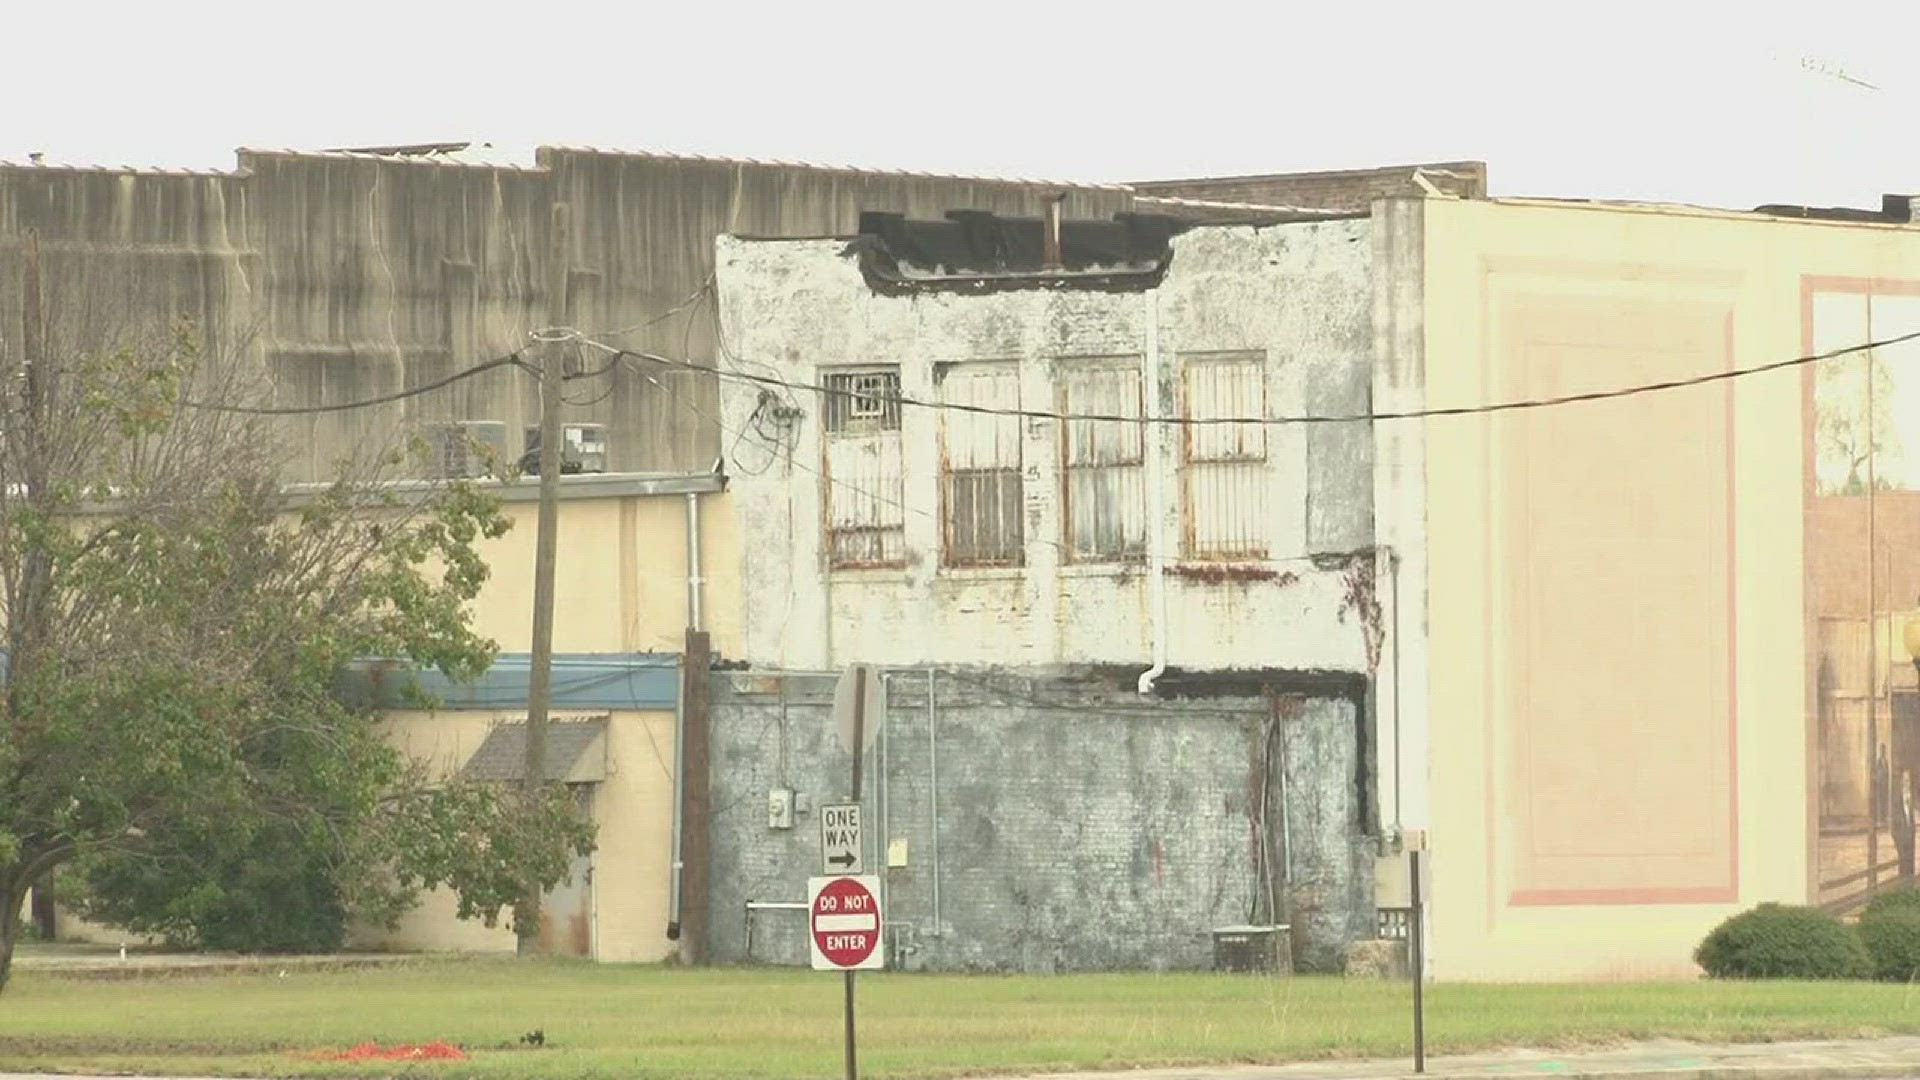 The Go Forward Pine Bluff organization is working to revitalize the city.